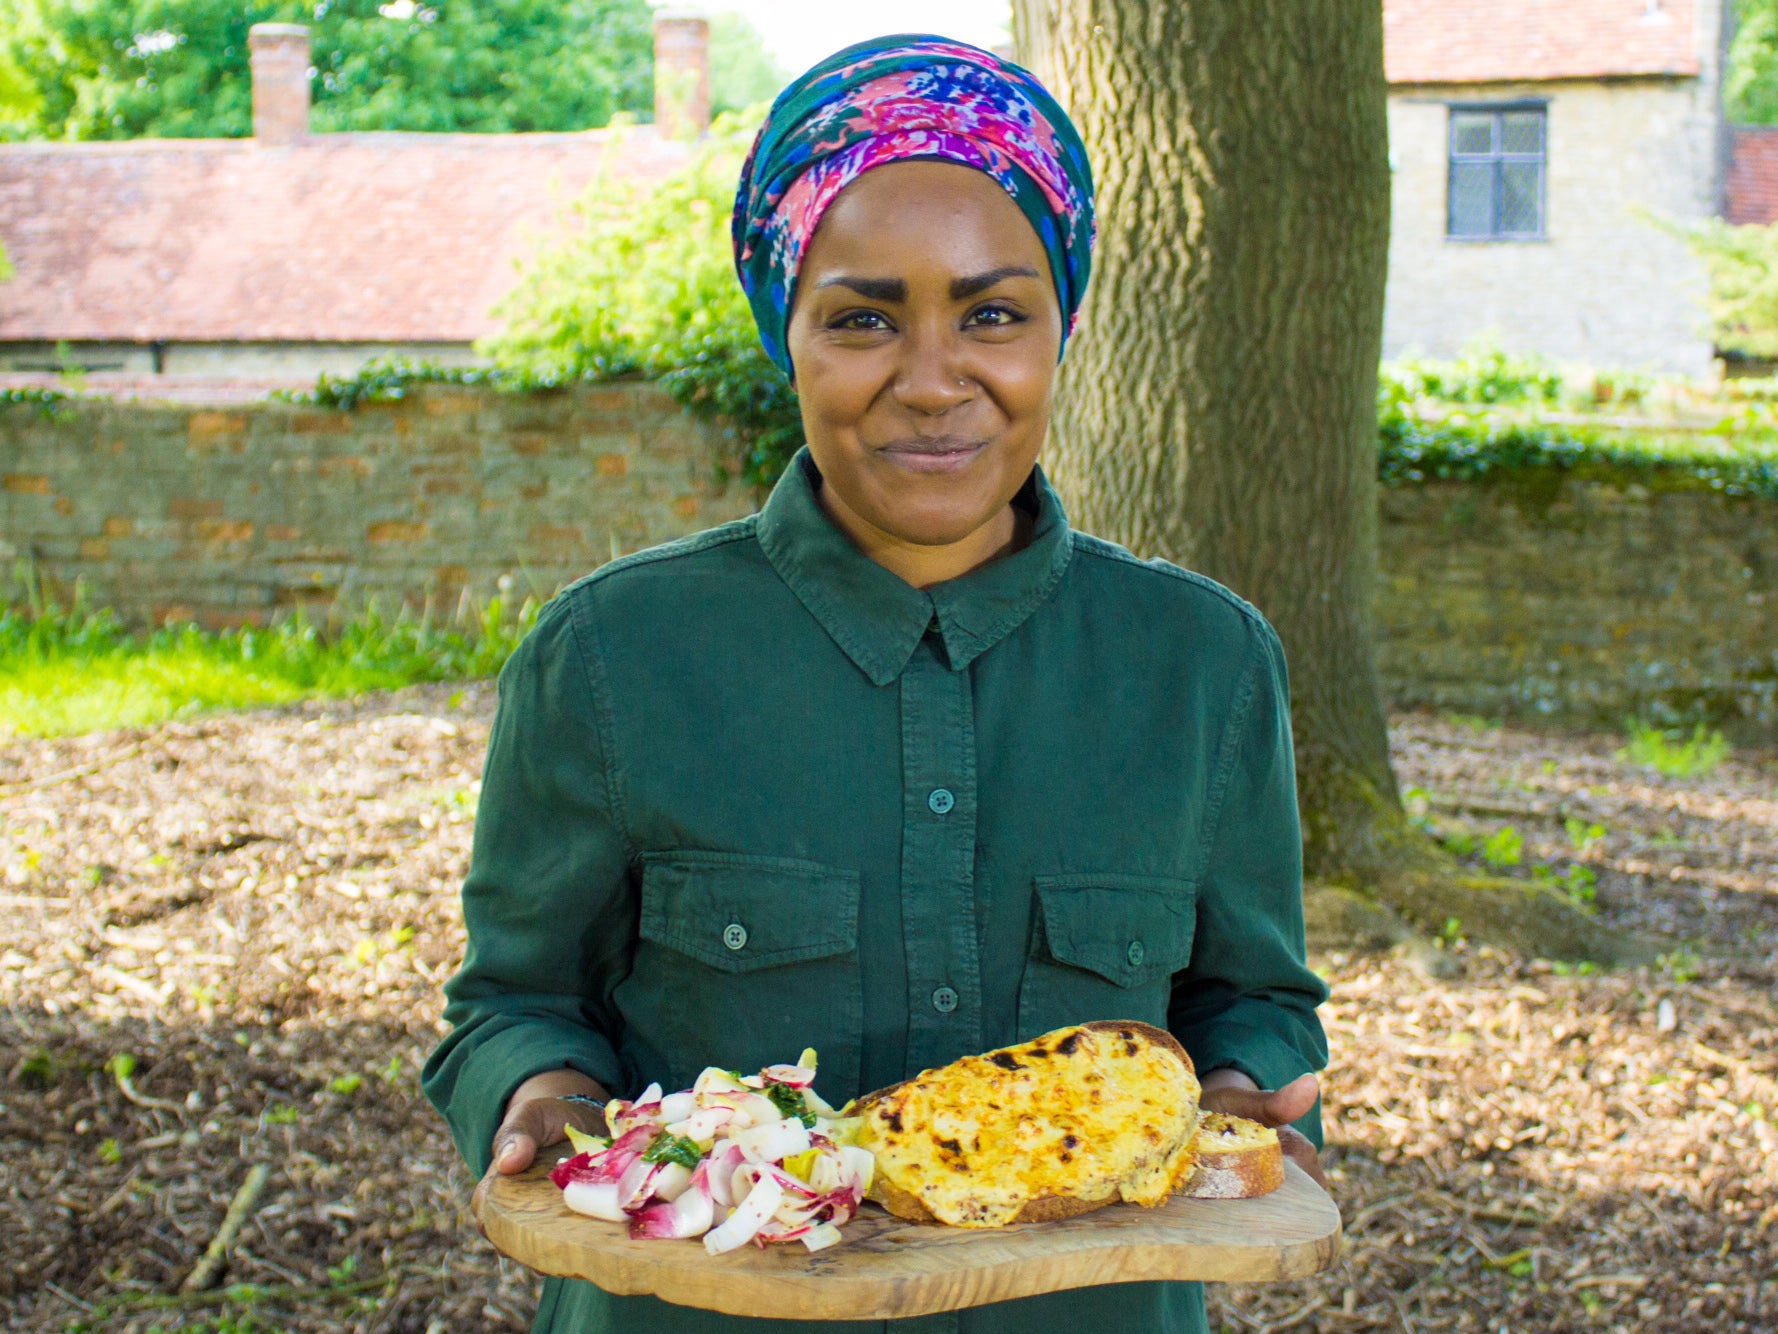 Nadiya Hussain sits at the more prosaic, less raunchy end of the celeb spectrum